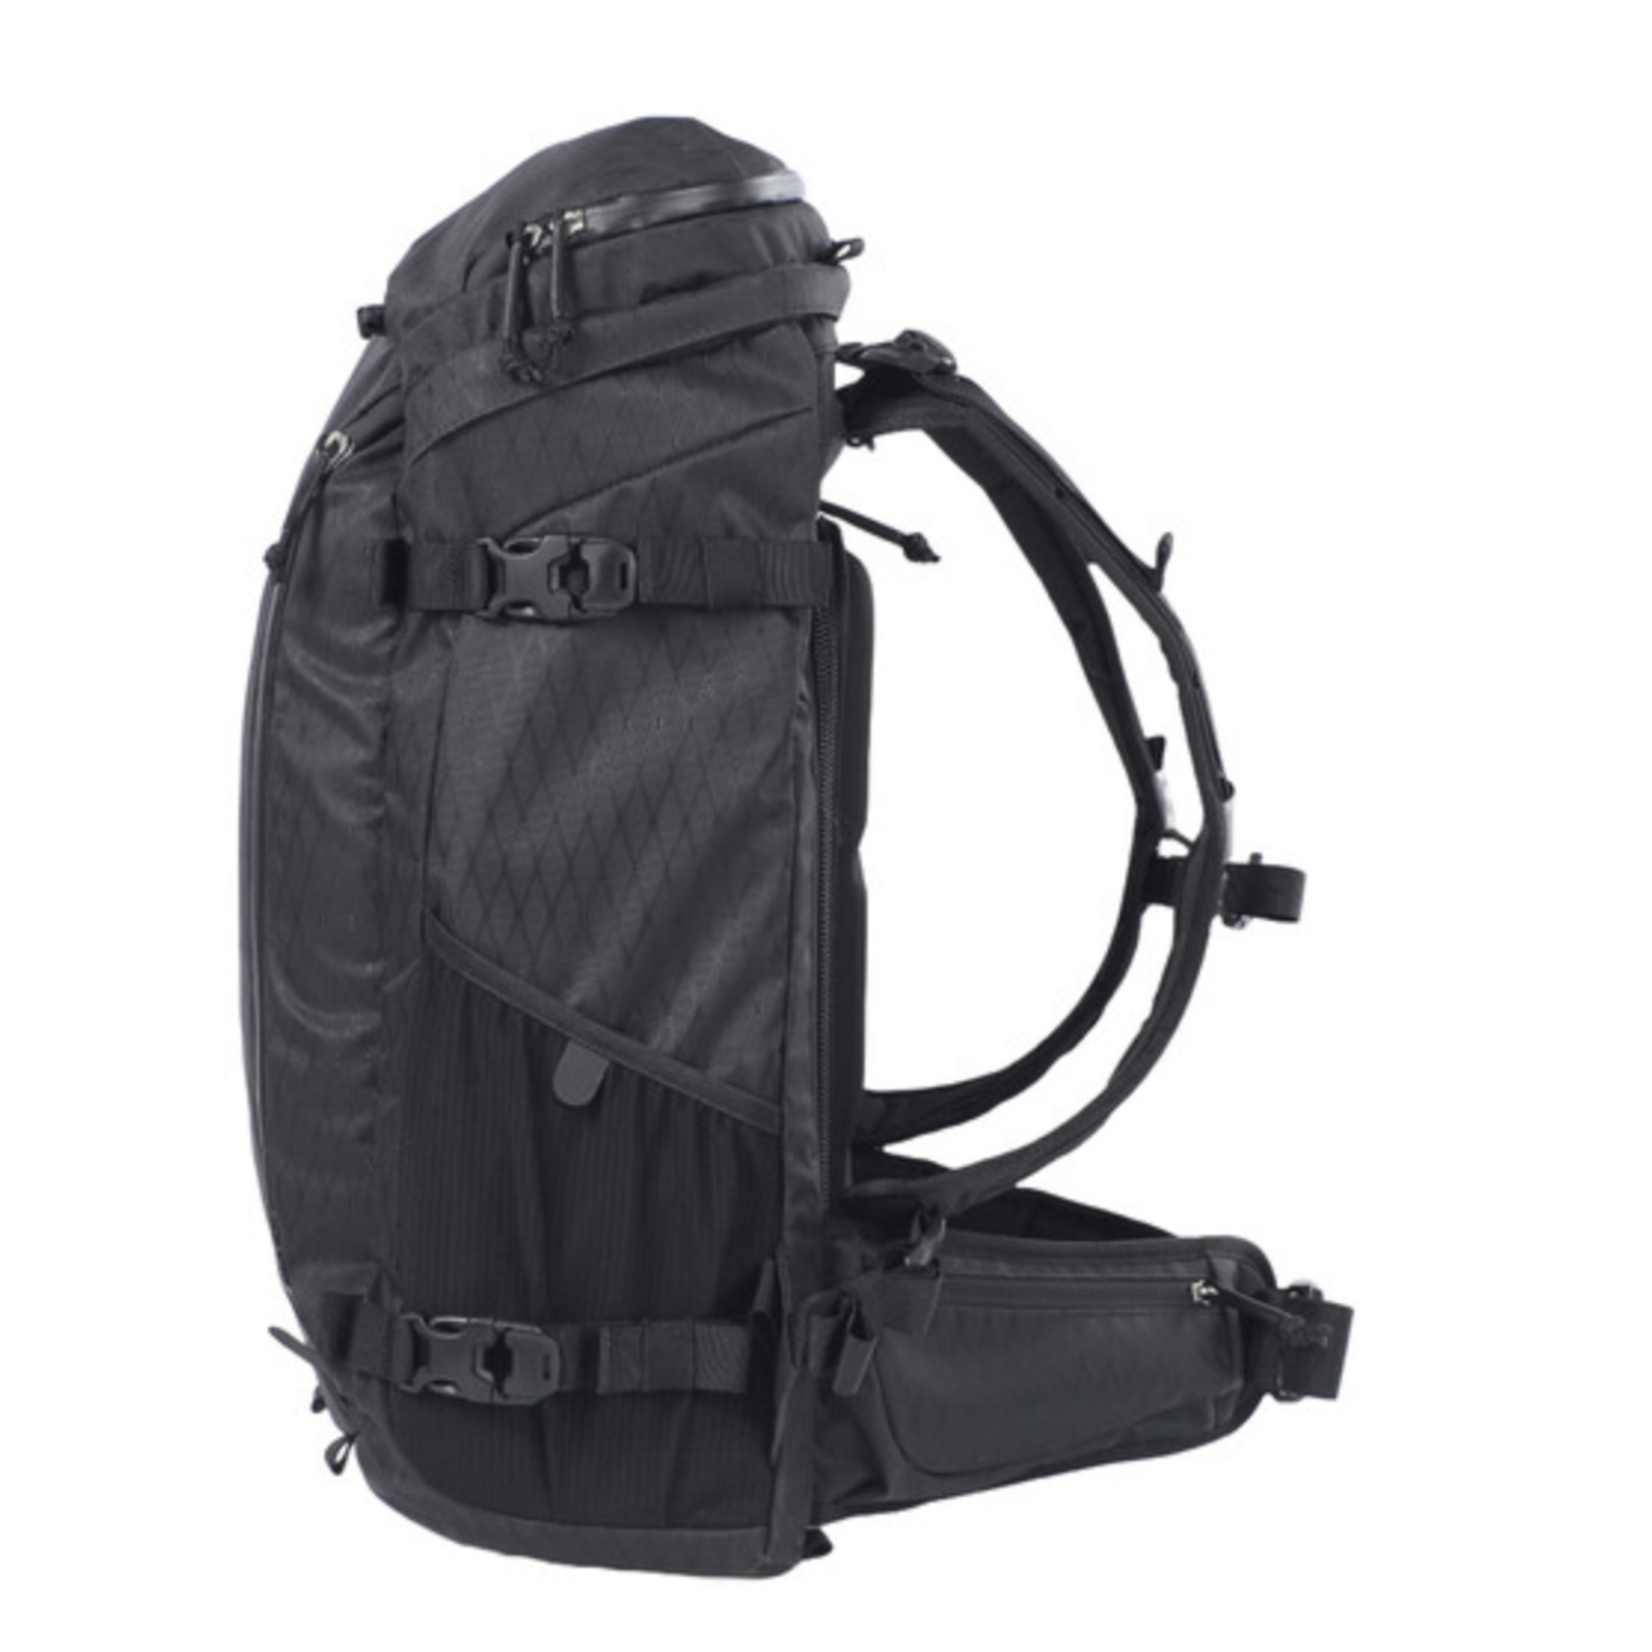 f-stop f-stop Lotus 4 CORE DuraDiamond Backpack with Shallow Medium Insert (Anthracite Black, 28L)